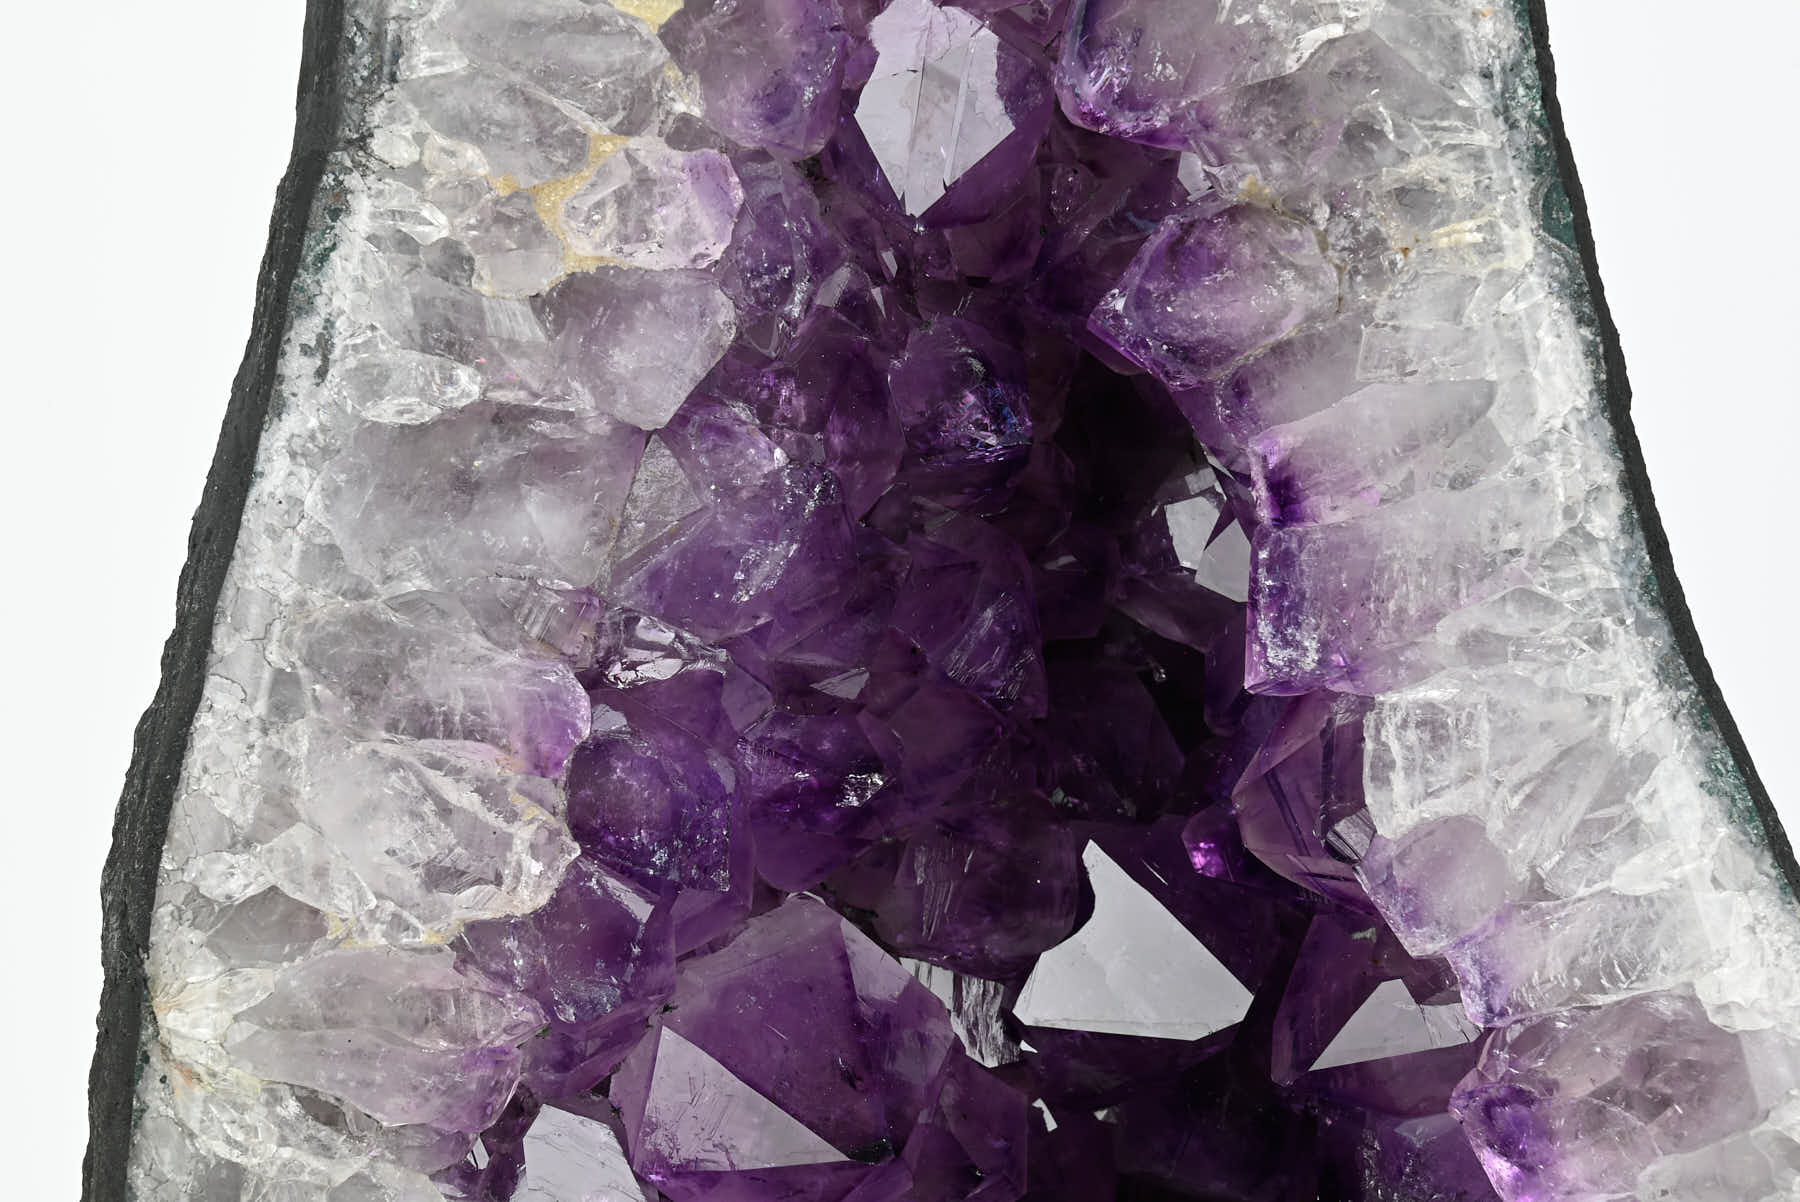 Extra Quality Amethyst Cathedral - 9.75kg, 37cm tall - #CAAMET-10051